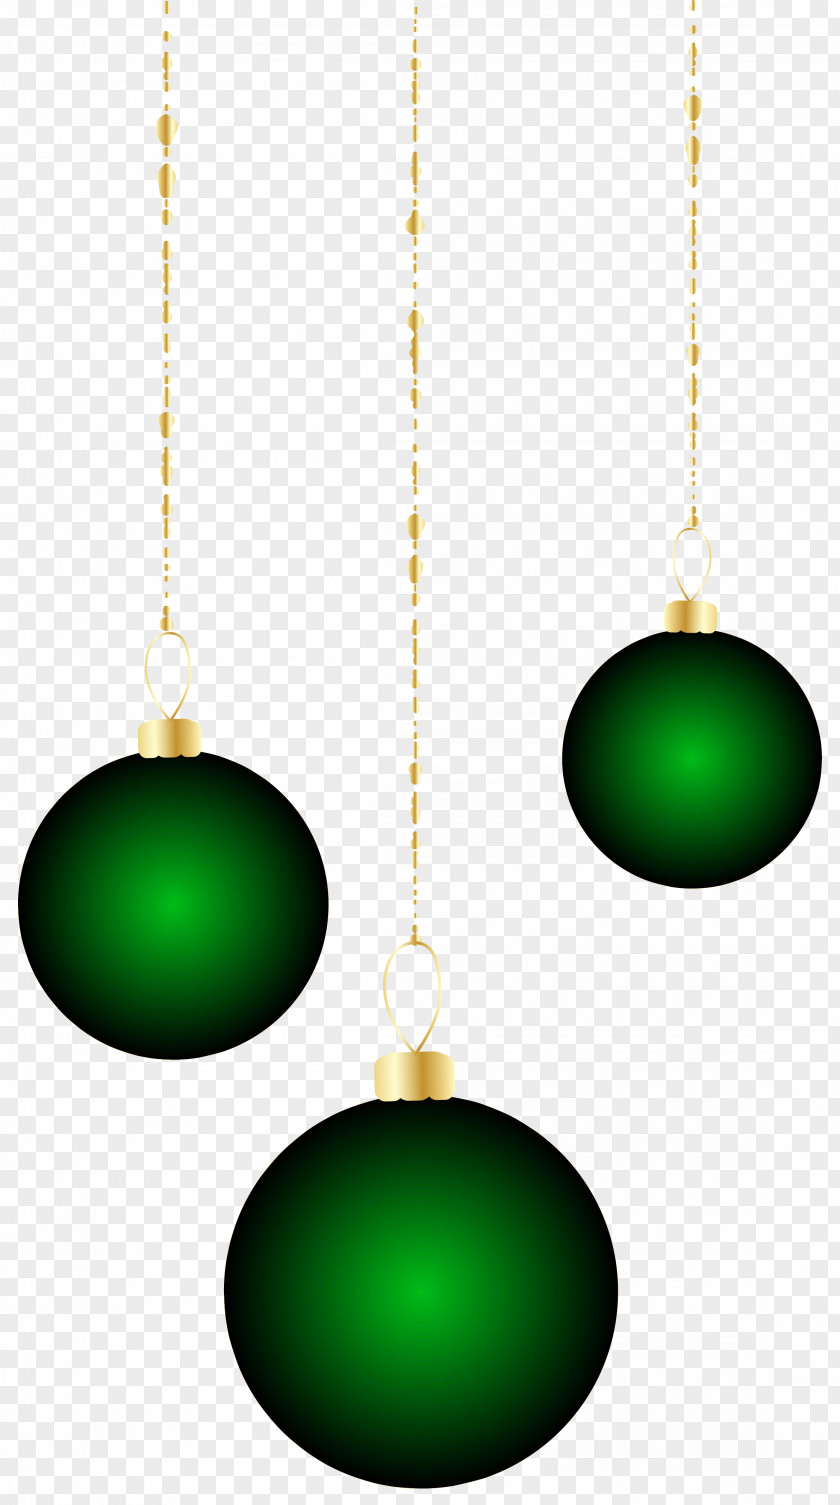 Transparent Christmas Green Ornaments Clipart Body Piercing Jewellery Sphere Ornament PNG